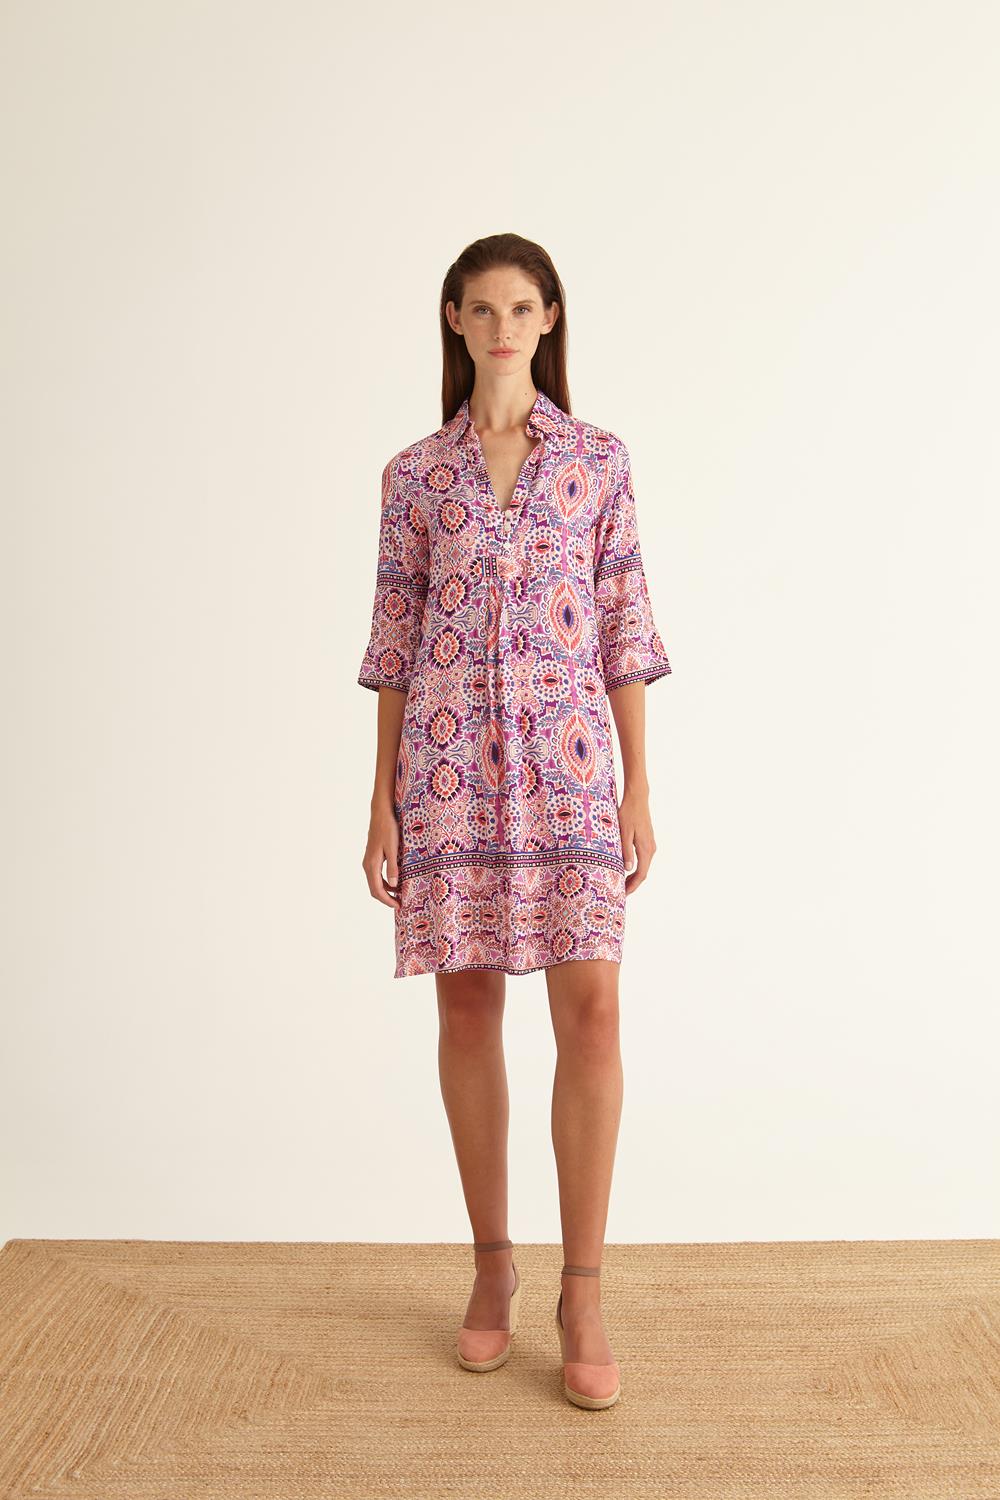 Elbow Length Butterfly Sleeved Dress in Moroccan Tile Print 